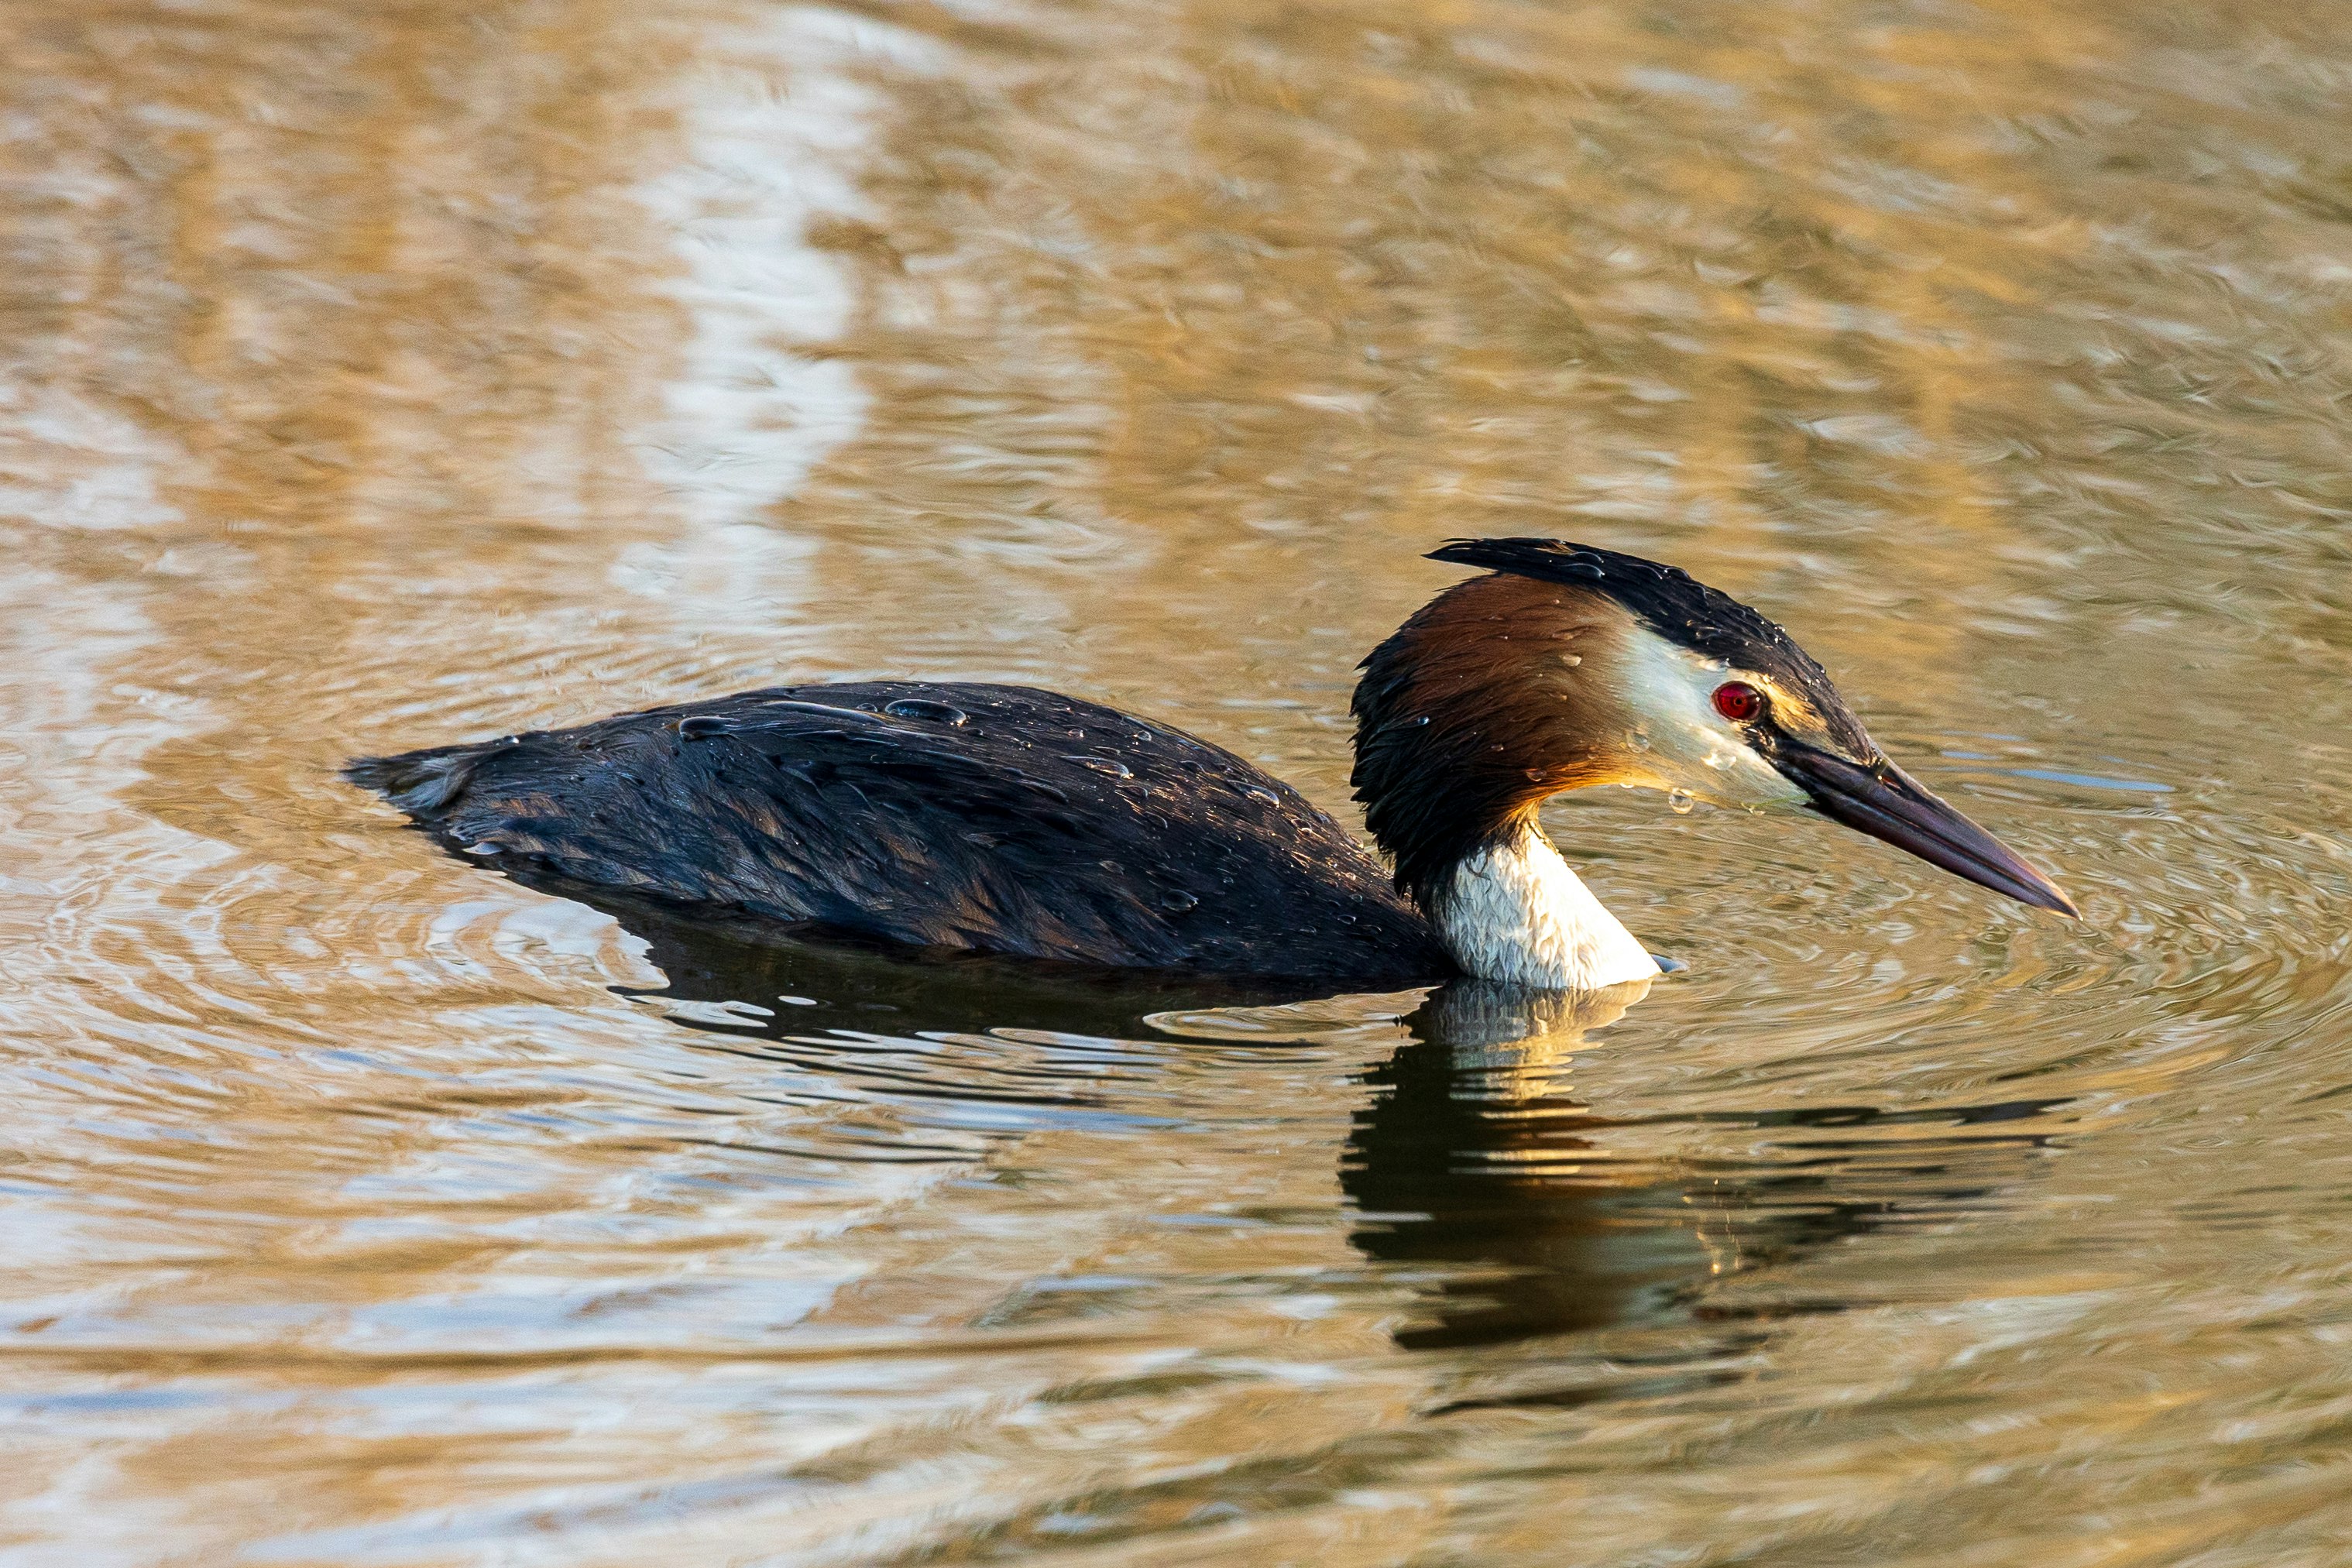 (143) Water off a Grebes back
Great crested grebe recently surfaced from a fishing trip